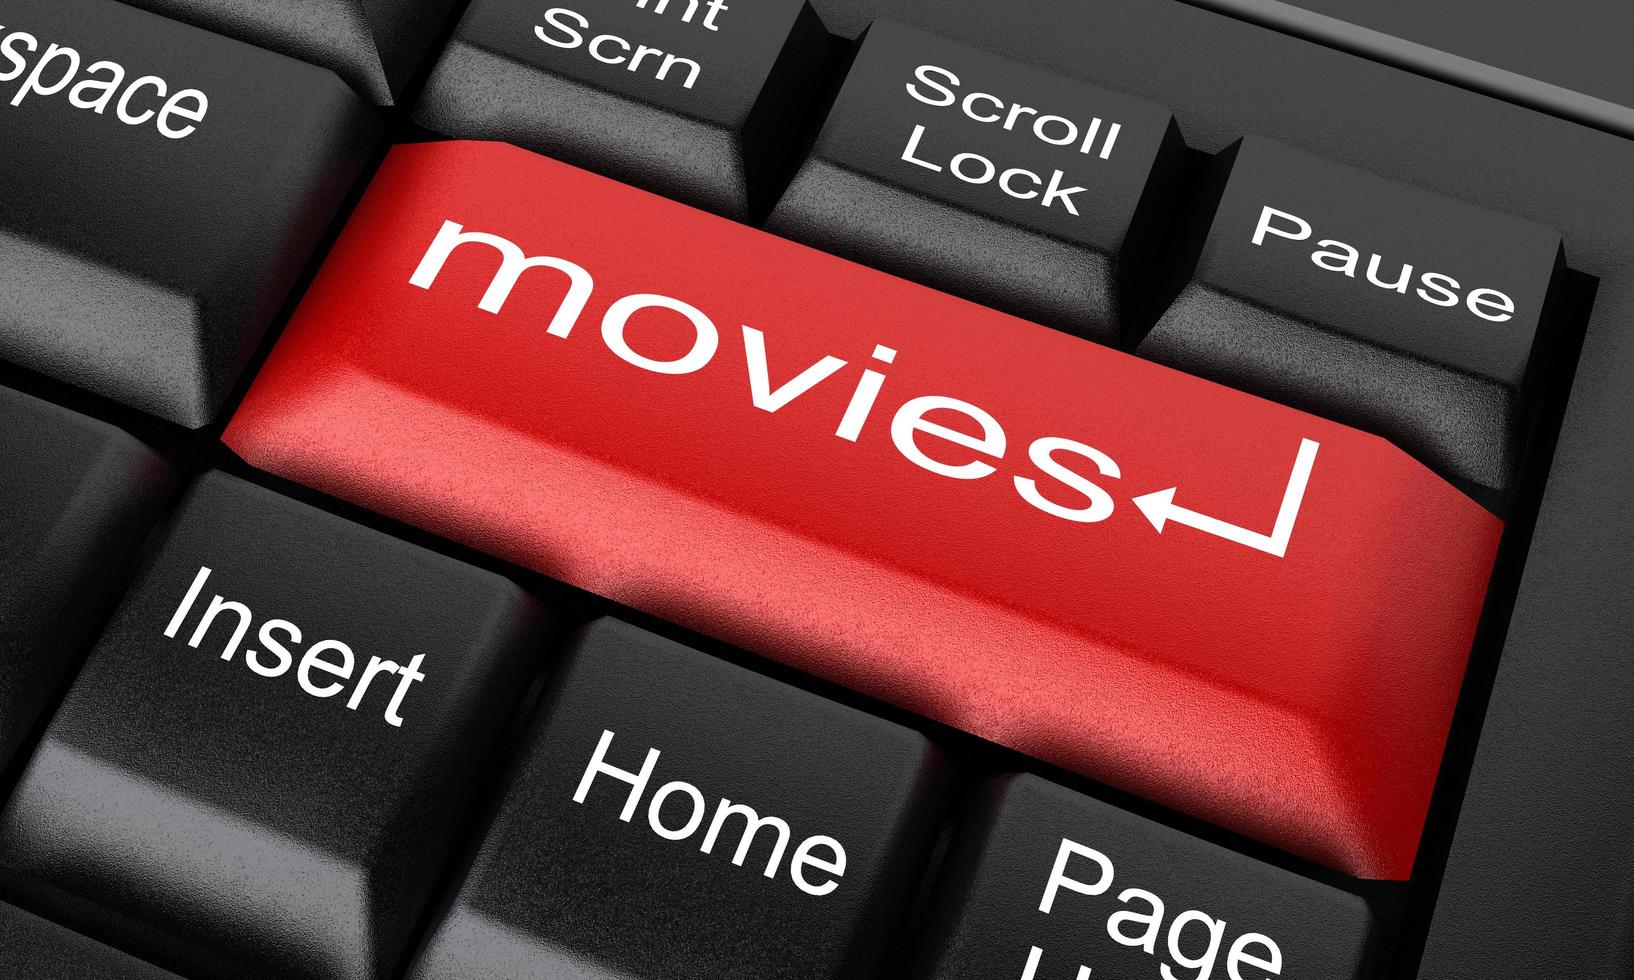 movies word on red keyboard button photo